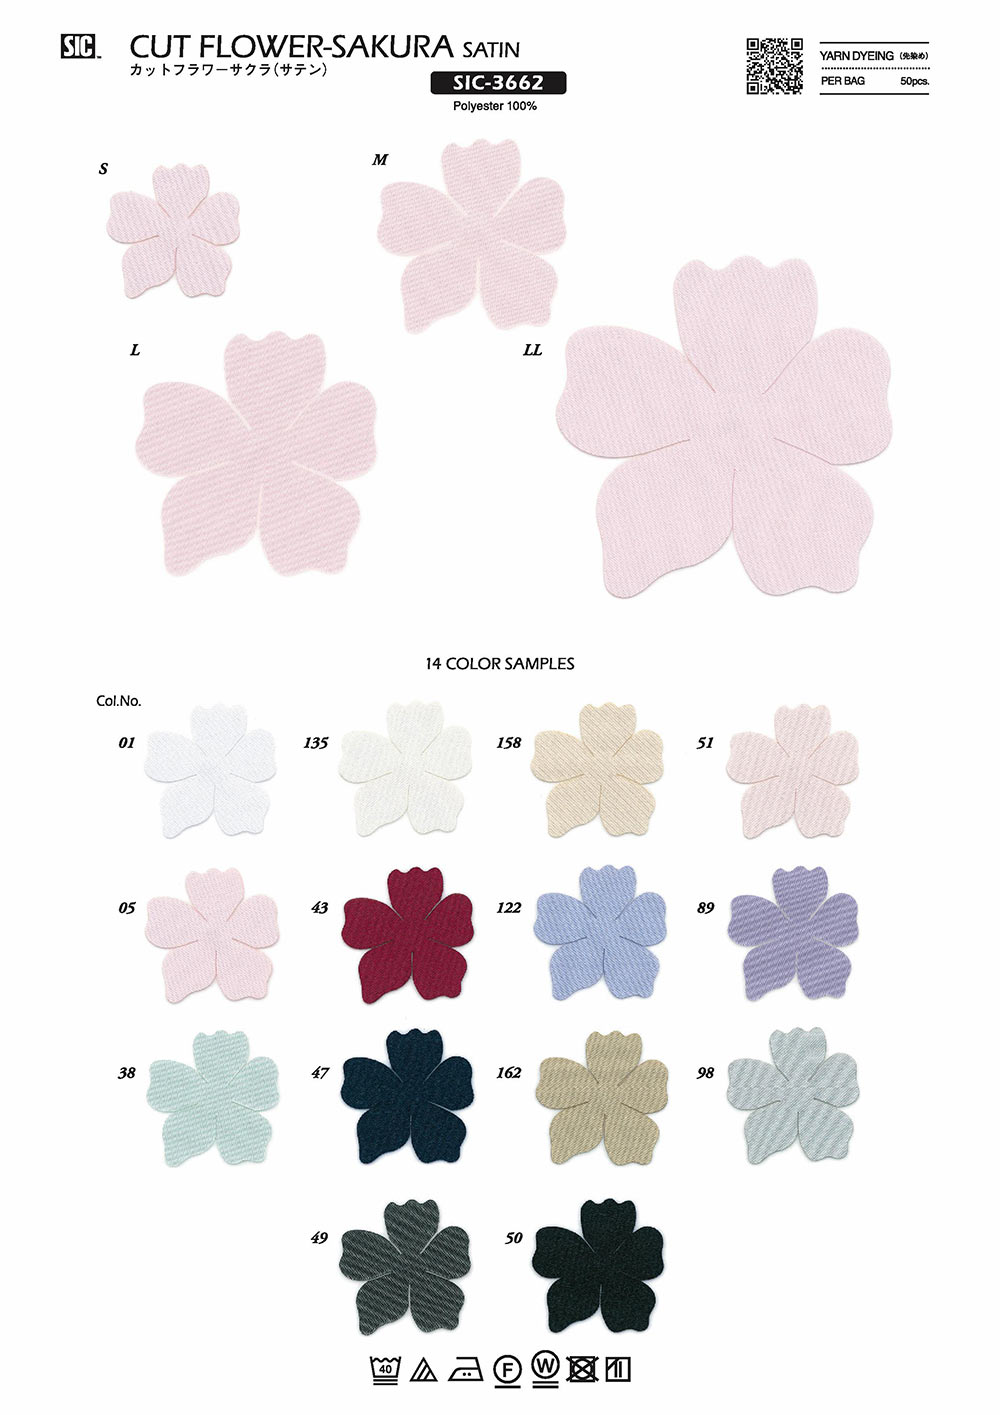 SIC-3662 Cut Flower Cherry (Satin)[Miscellaneous Goods And Others] SHINDO(SIC)